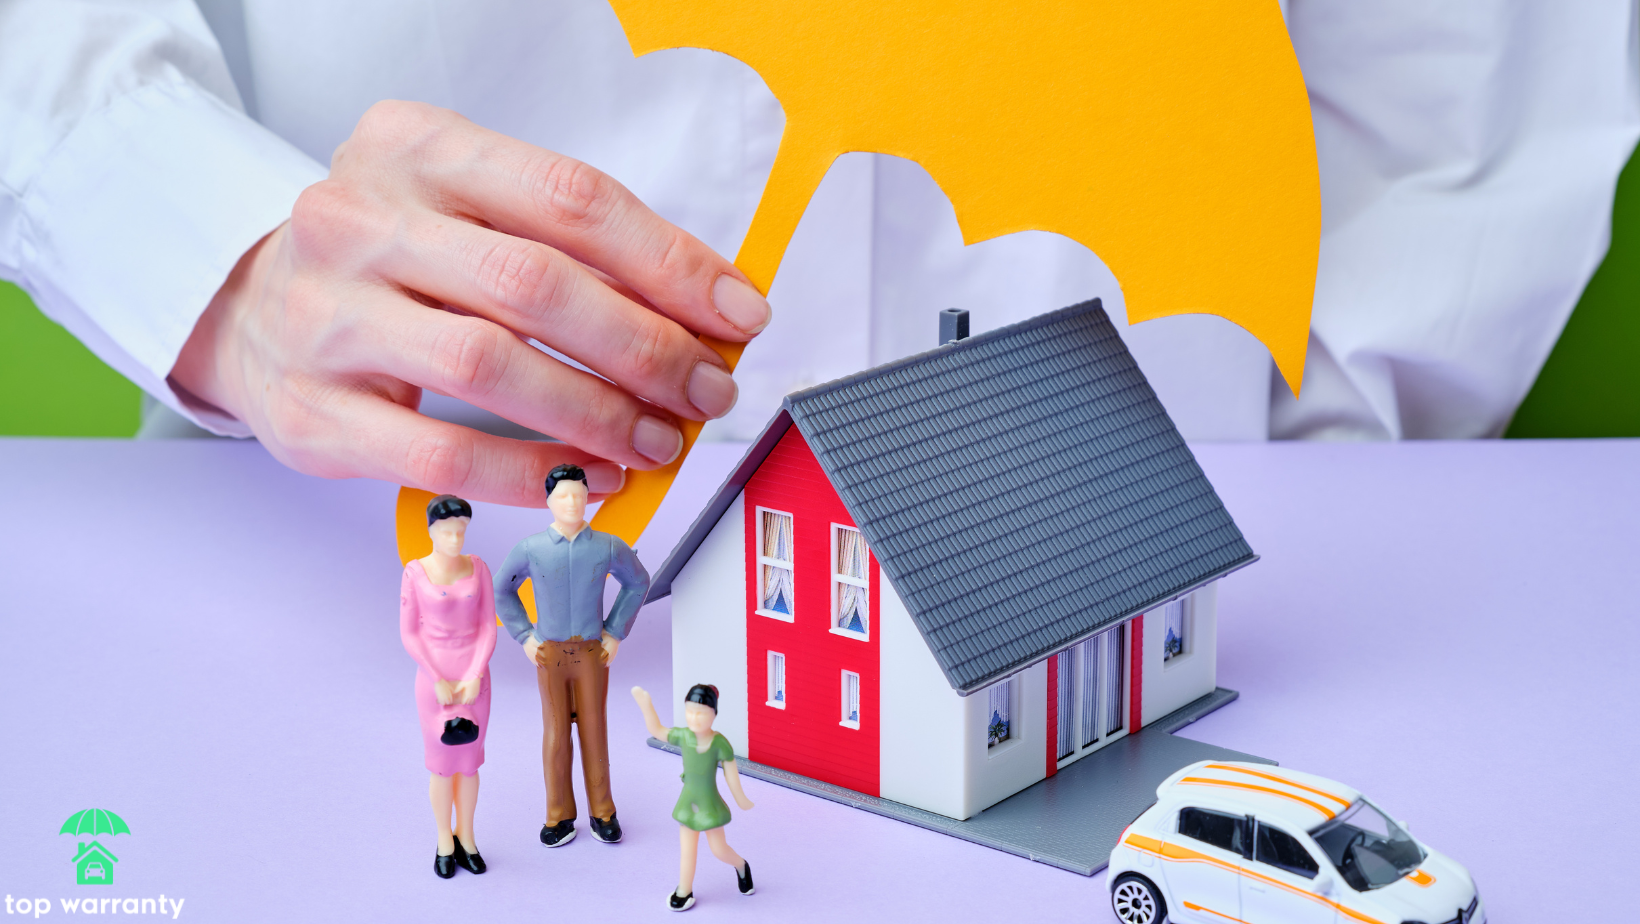 How Your Home’s Location Impacts Your Insurance Rates